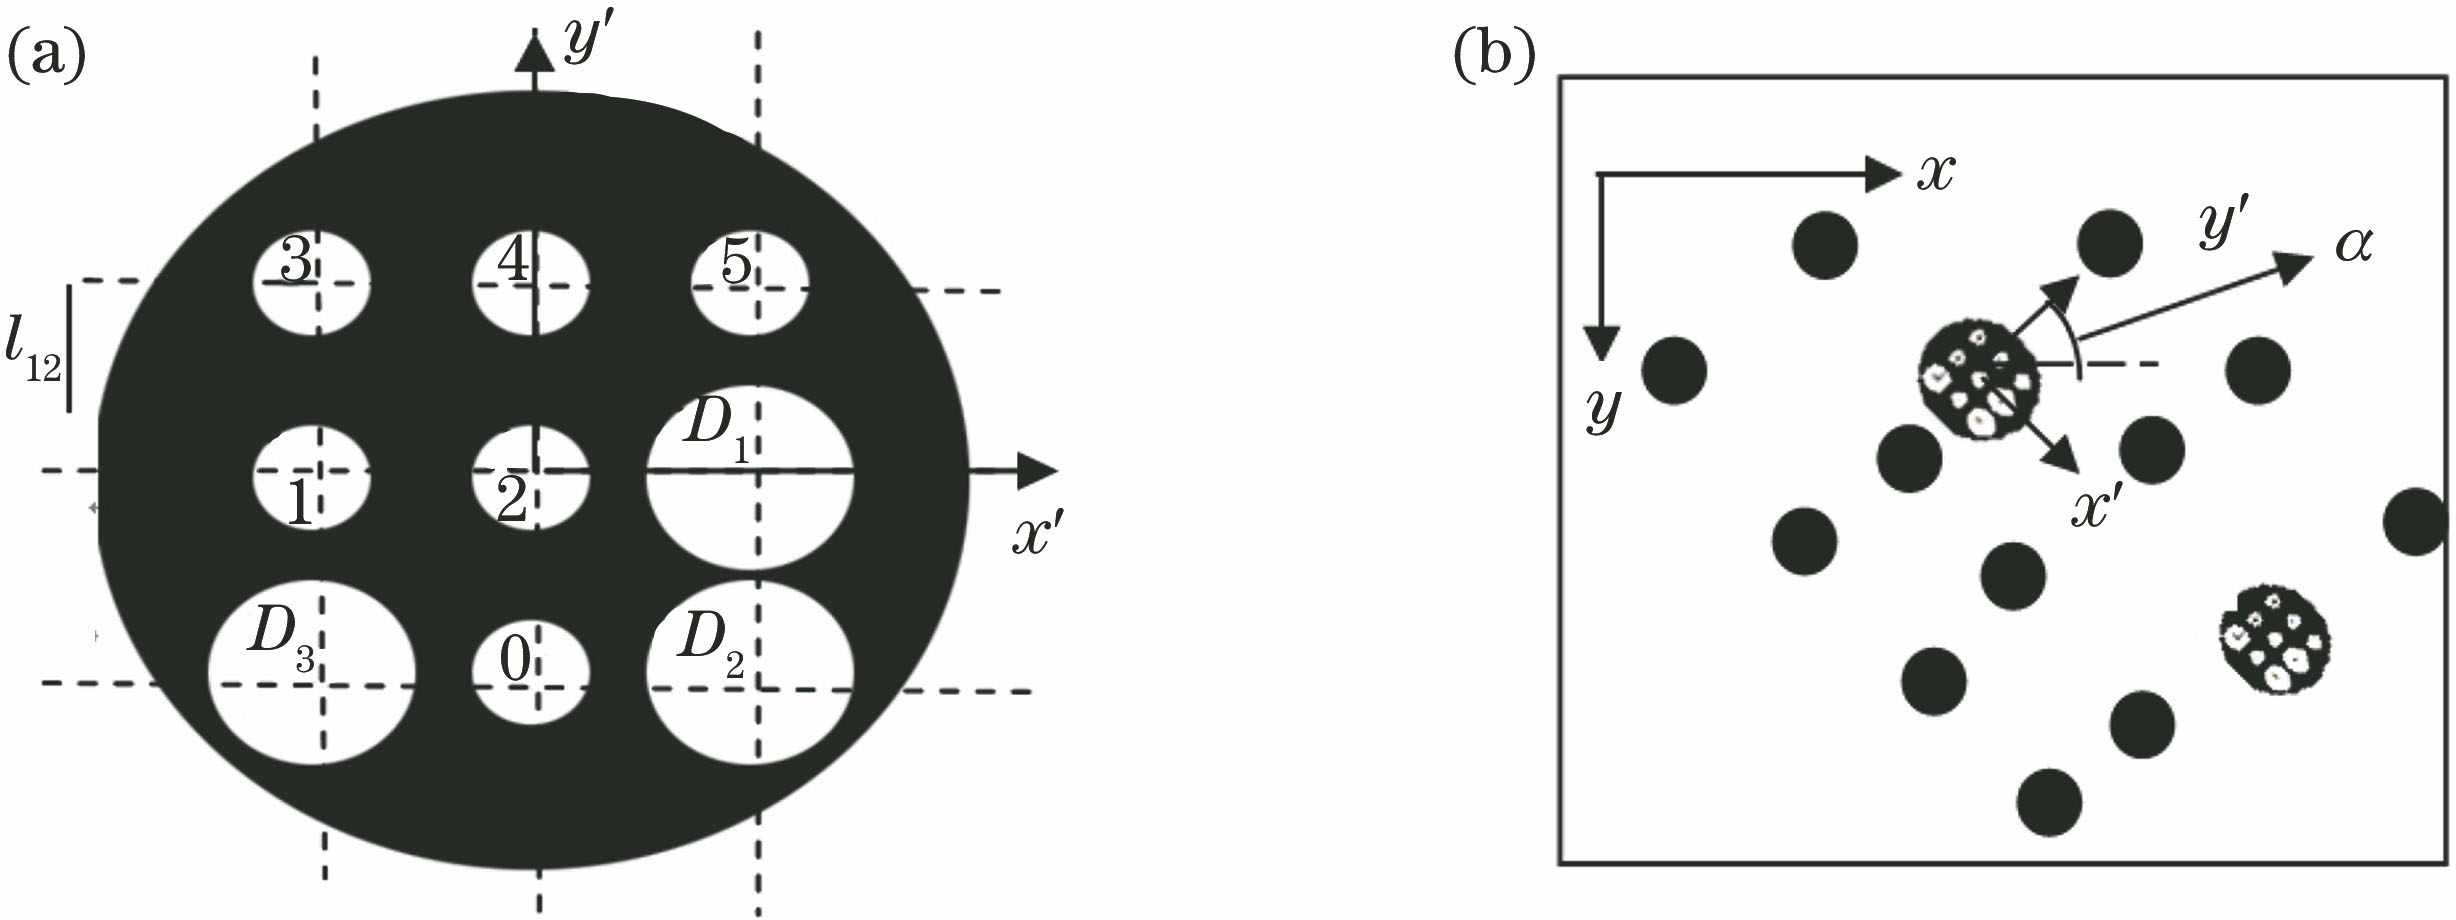 Automatic coding of marker. (a) Automatic coding of internal code for self-coding marker; (b) automatic coding of external code in target calibration field